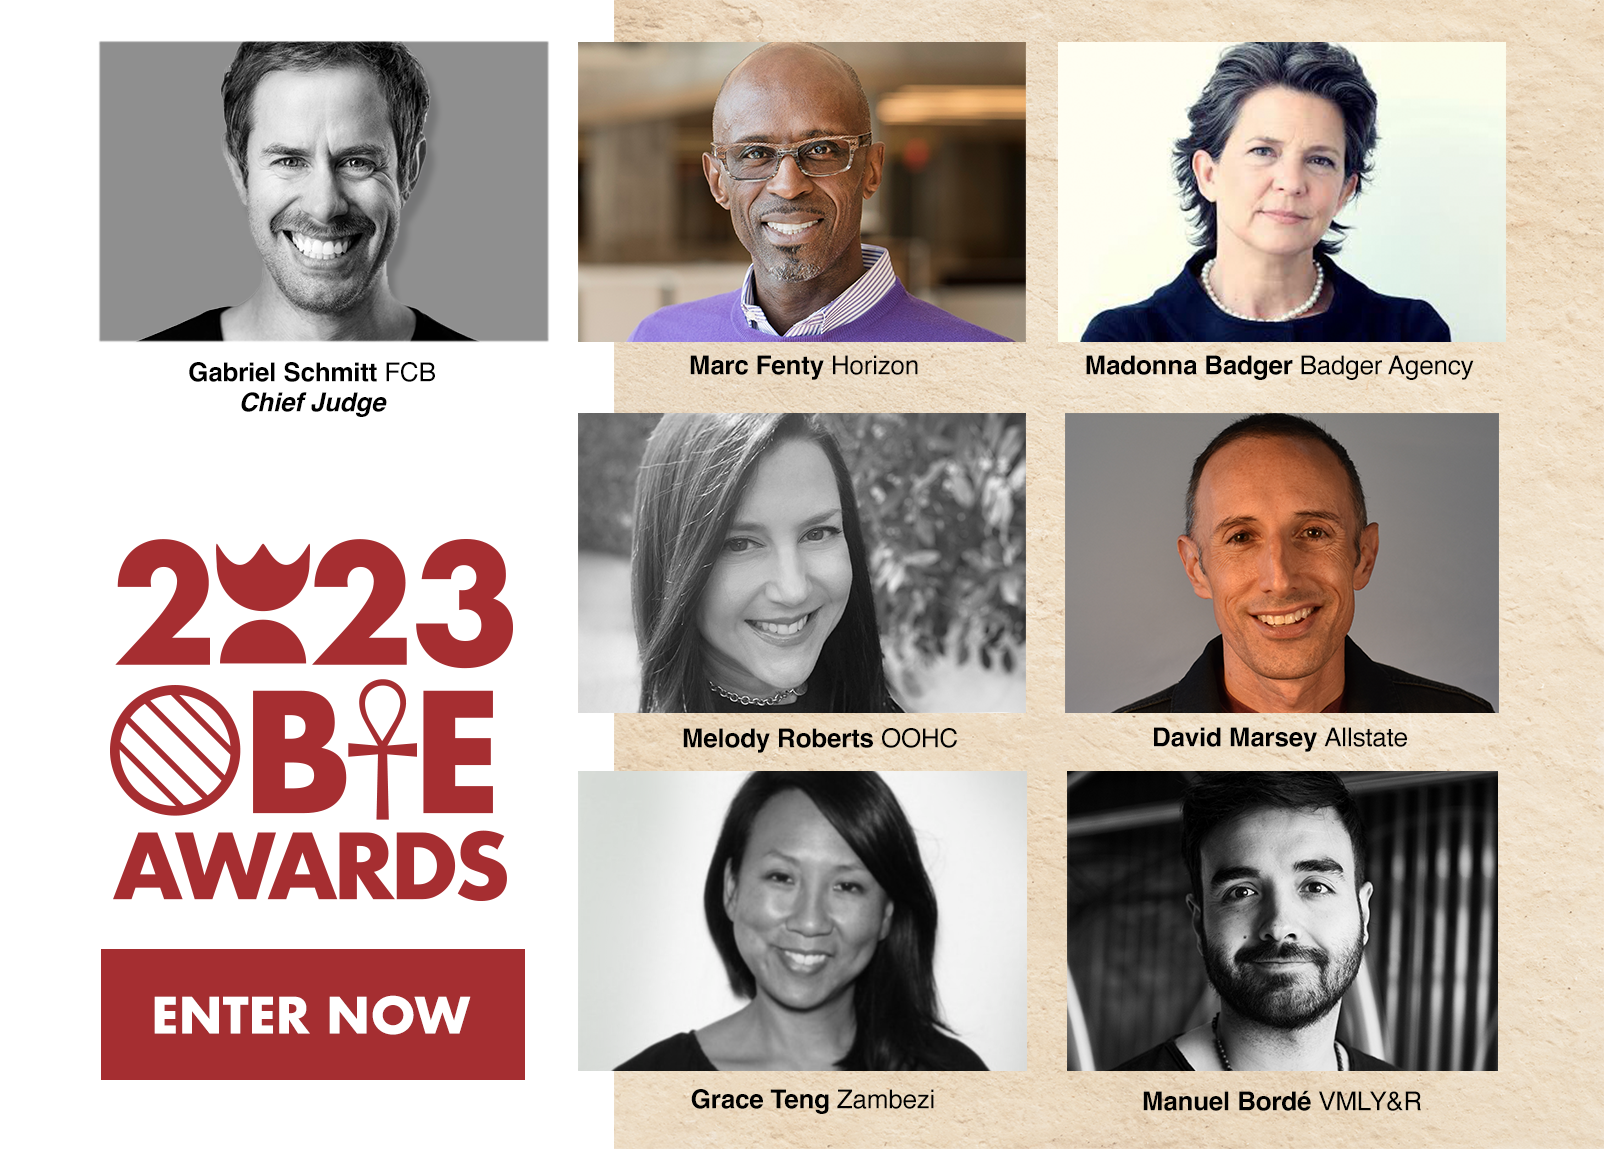 <strong></noscript>OAAA ANNOUNCES </strong><strong>81st OBIE AWARDS ILLUSTRIOUS JURY ROSTER, LED BY FCB NEW YORK CO-CHIEF CREATIVE OFFICER GABRIEL SCHMITT</strong>” />
	</a>
	<div class=